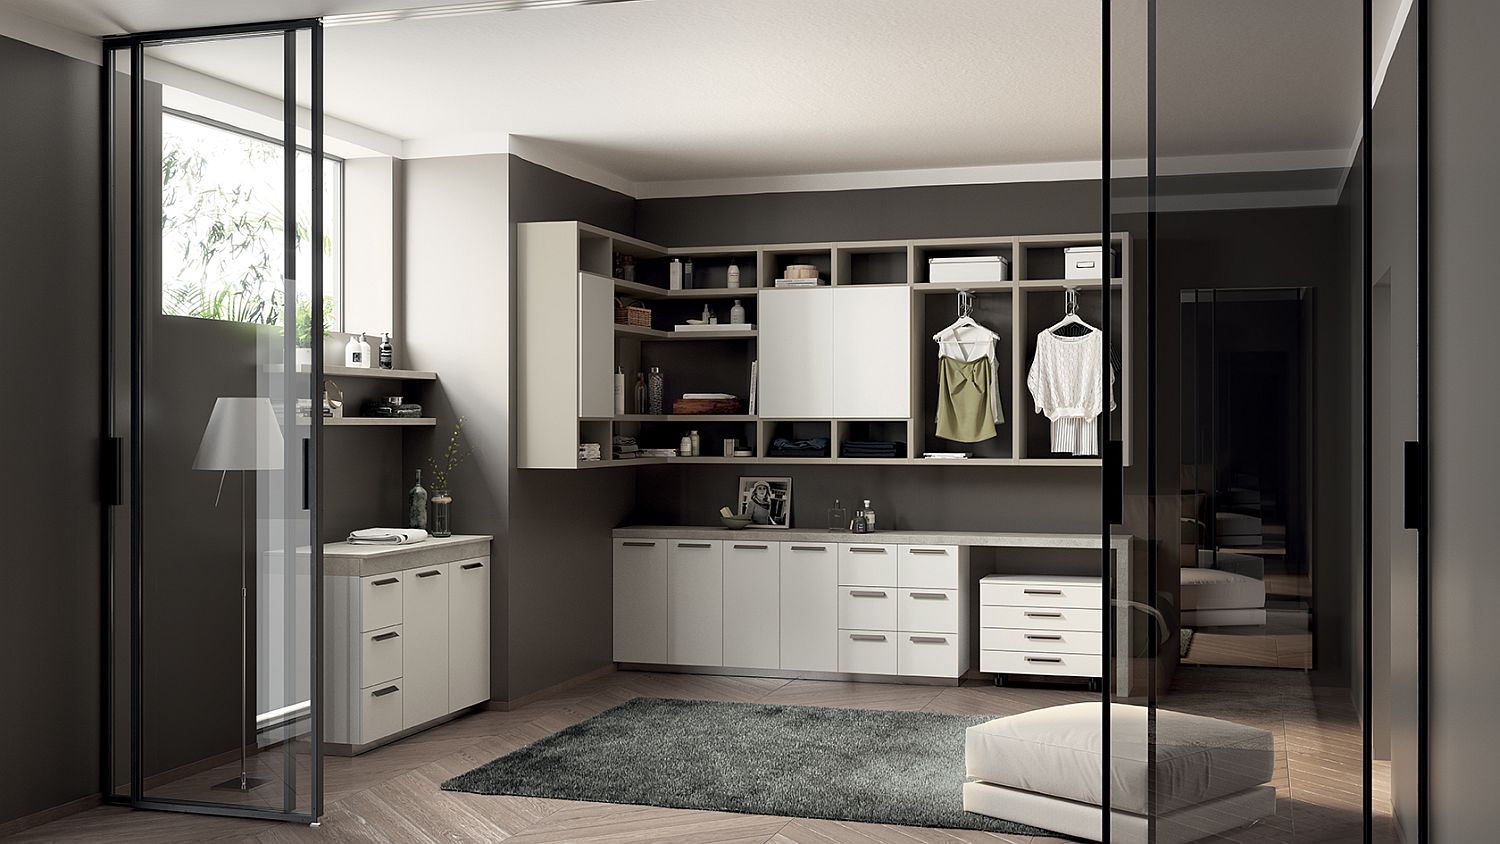 Wardrobes and storage racks are combined with the bathroom and laundry space hybrid